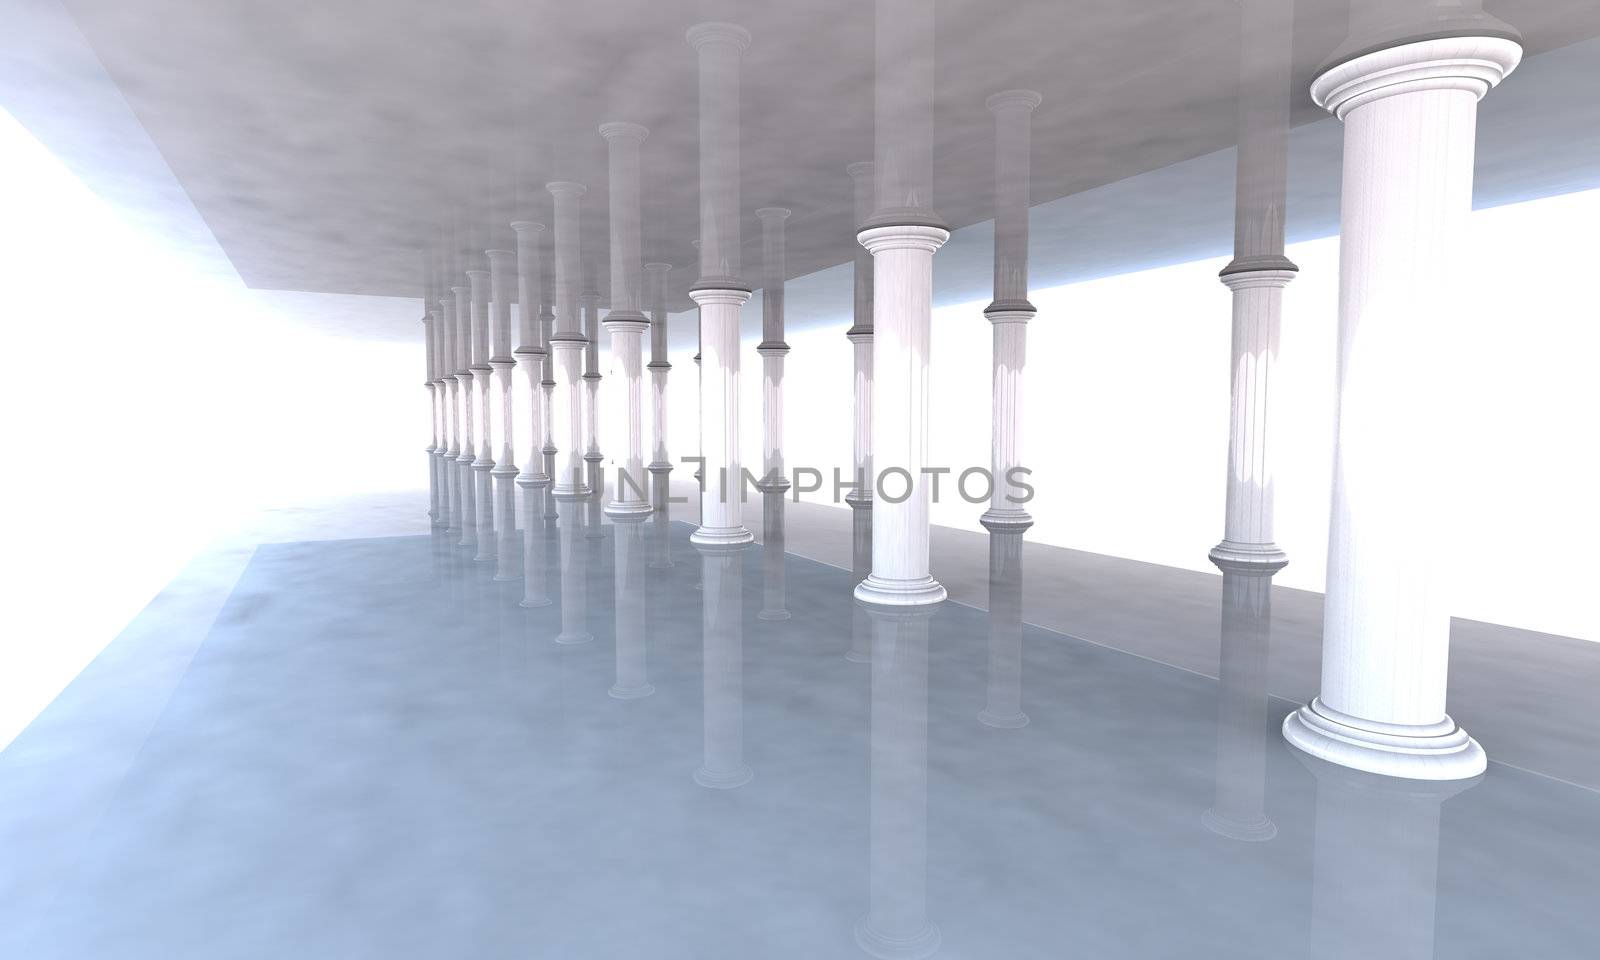 Classical colonnade with arcades and columns, approach of heaven.